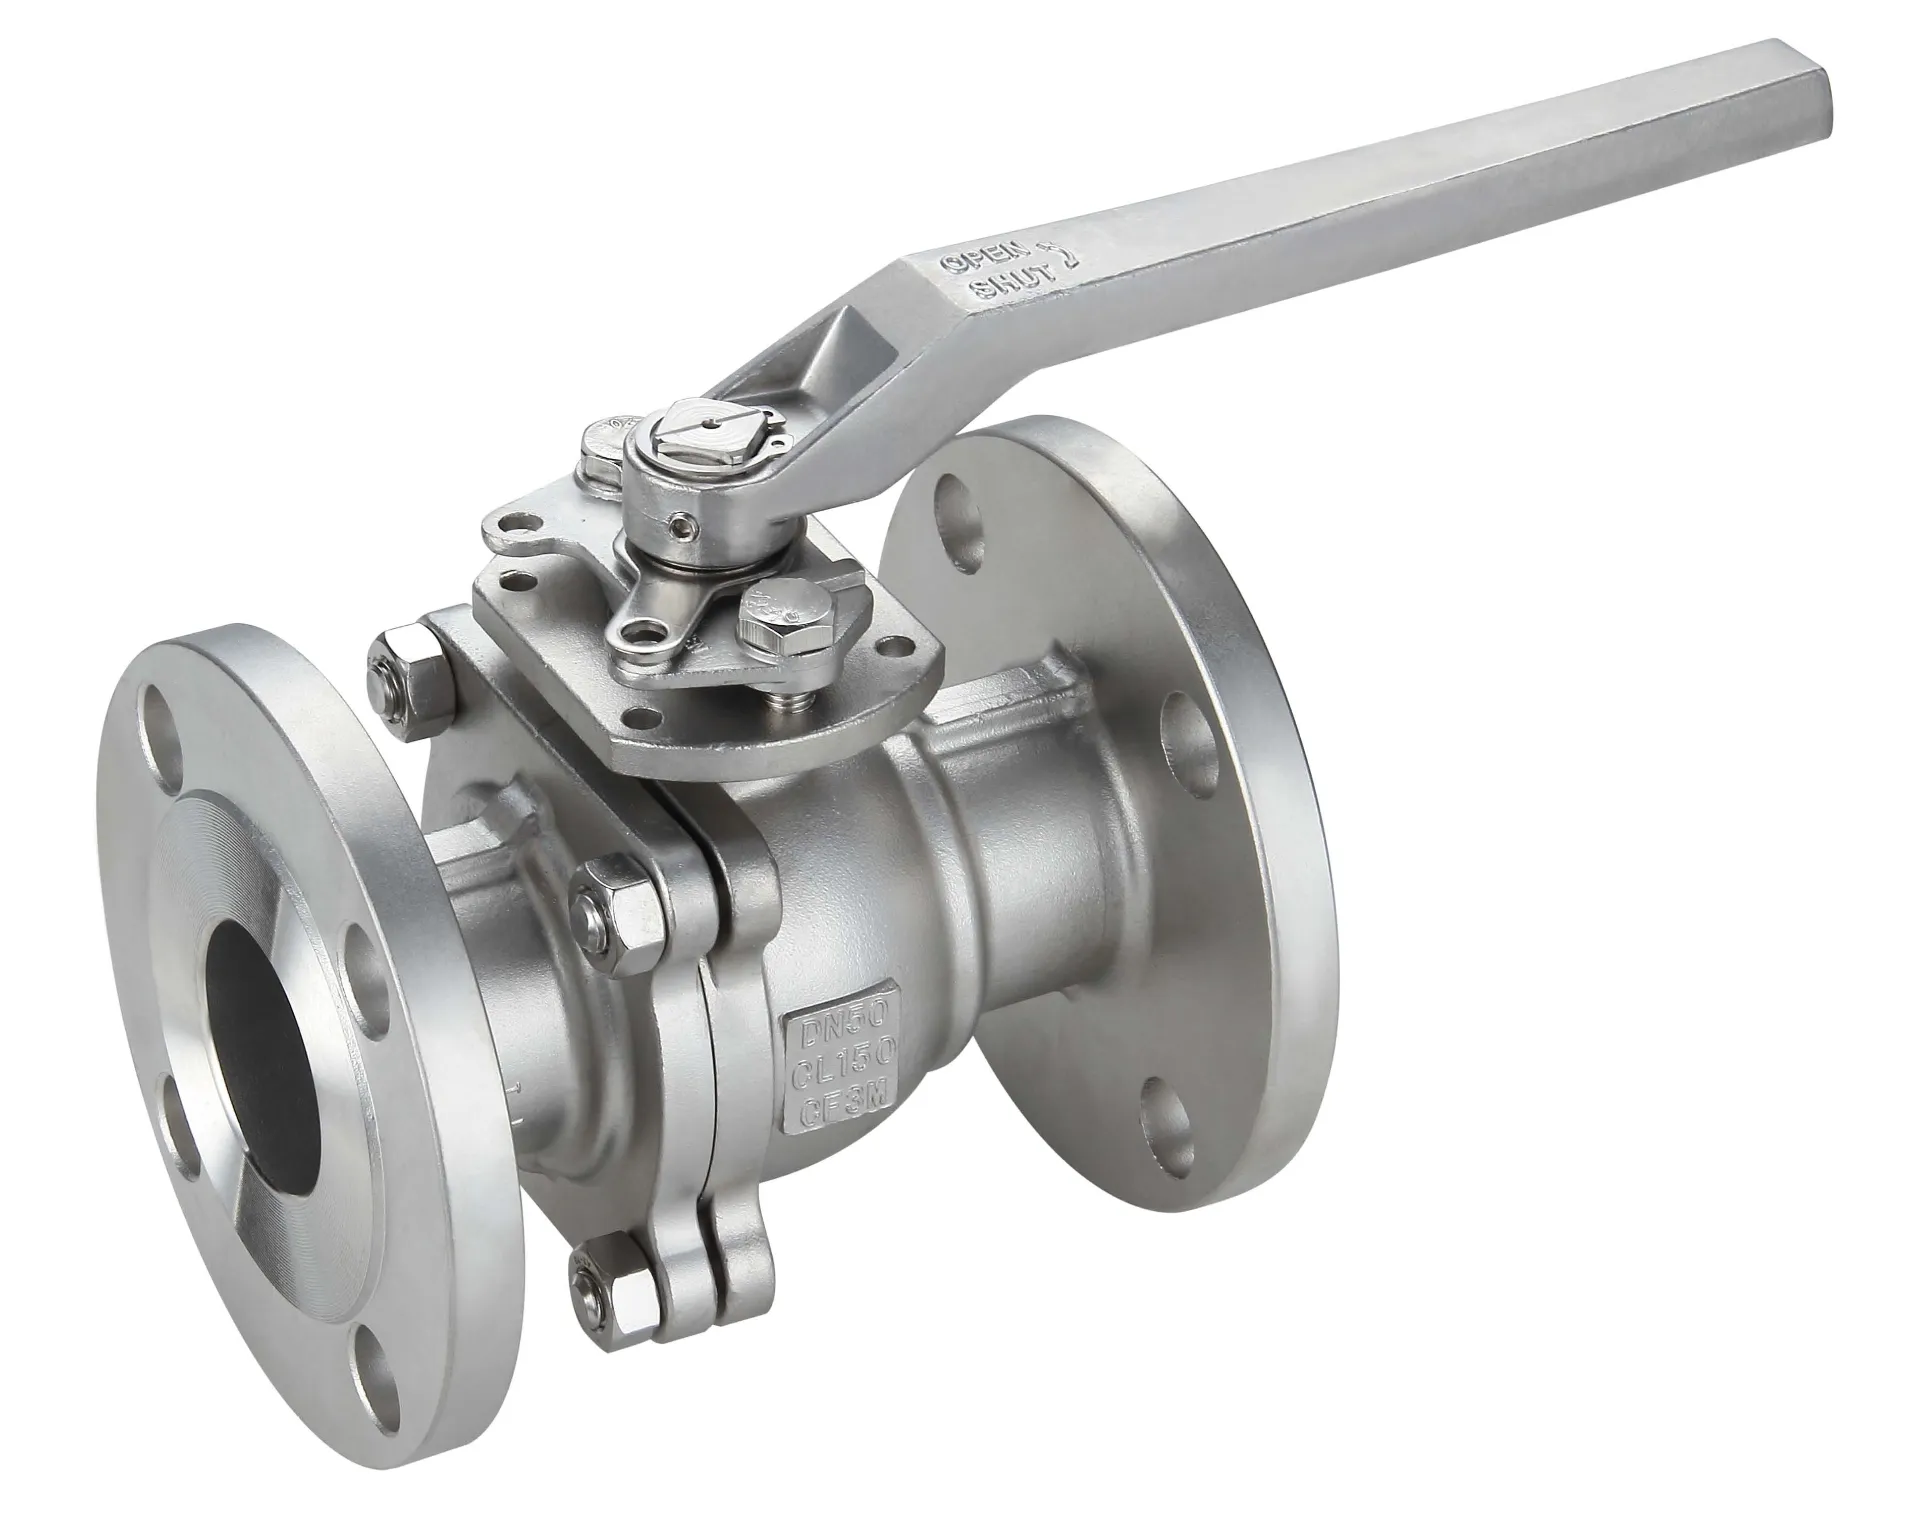 Crucial Role of Ball Valves in High-Pressure Environments